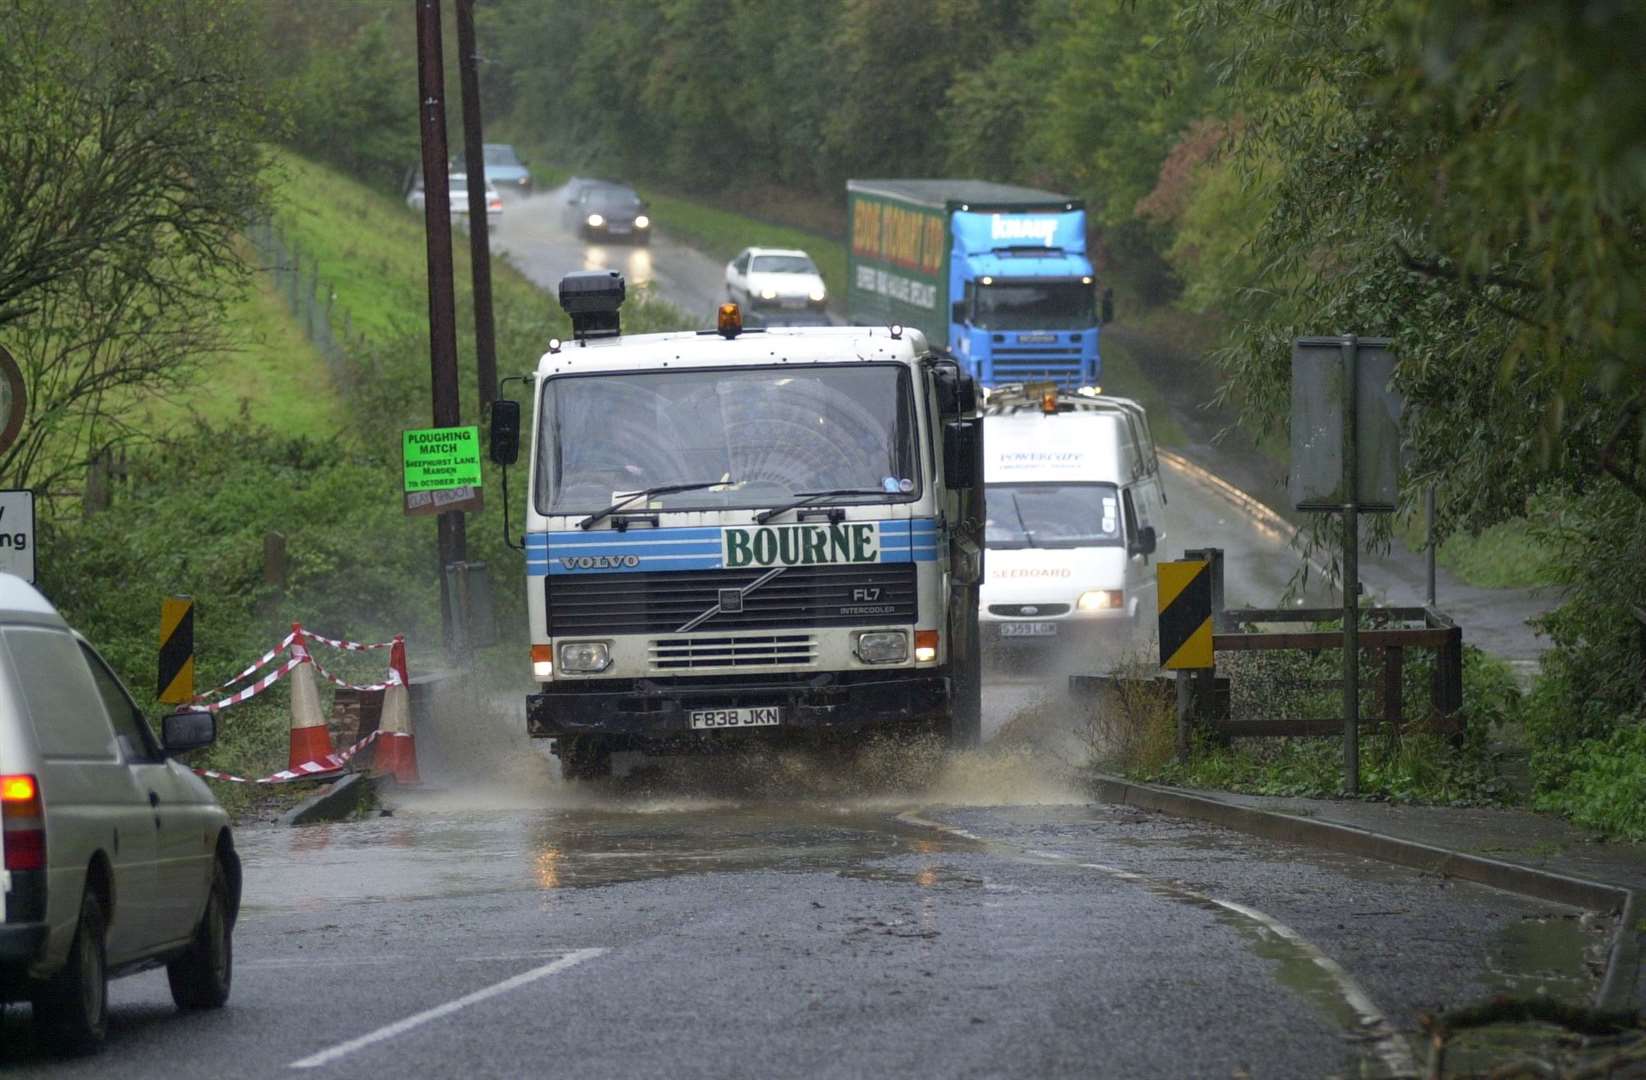 The down pour of rain on October 12 caused the route through Leeds to flood